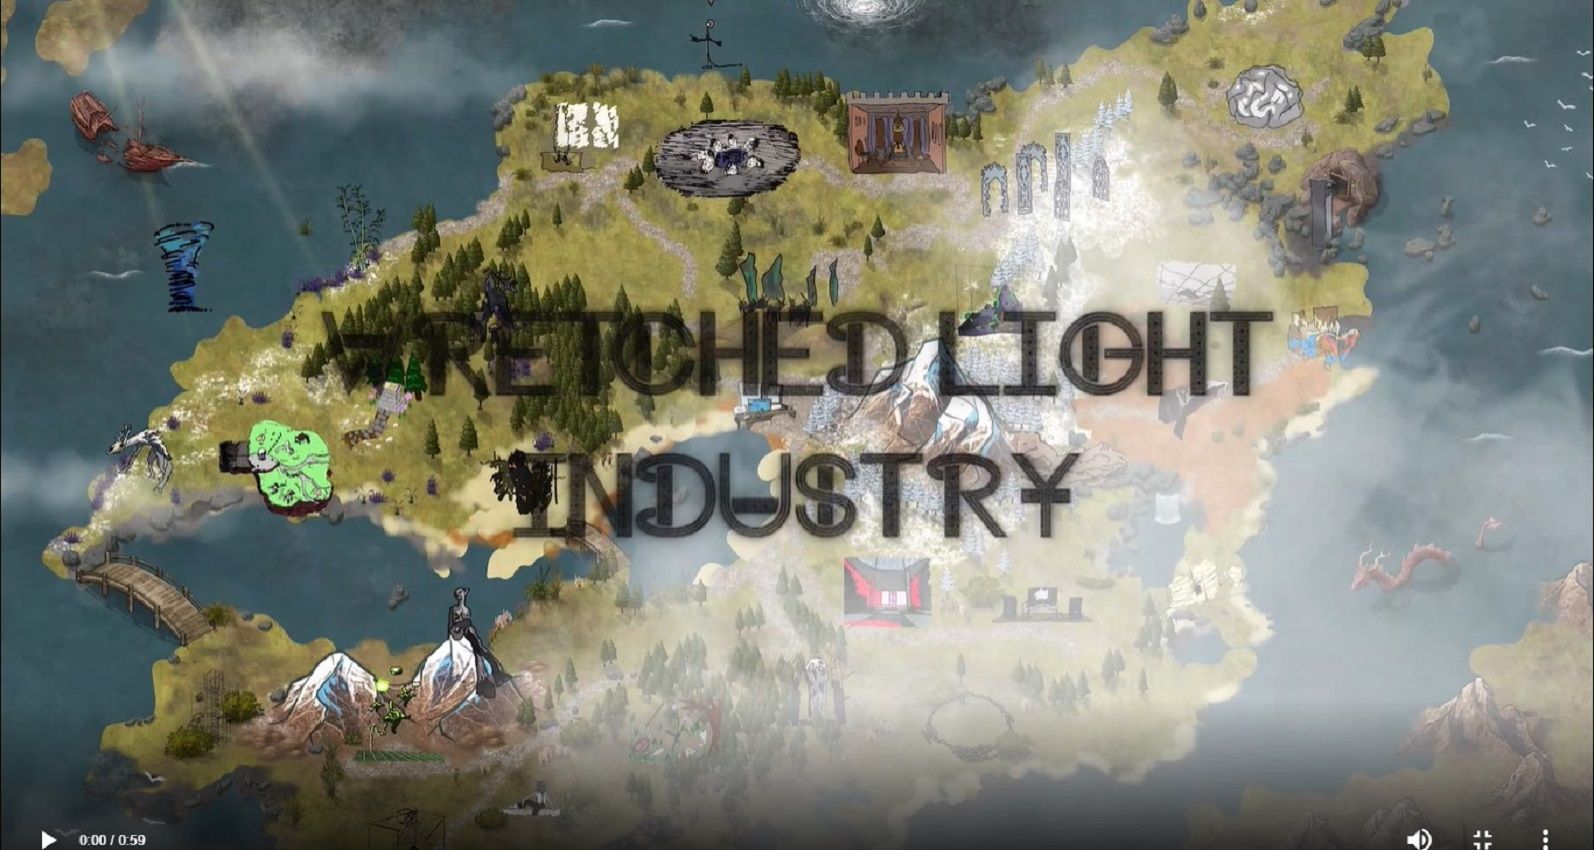 Explore the Wretched Light Industry, a virtual island for confined artists